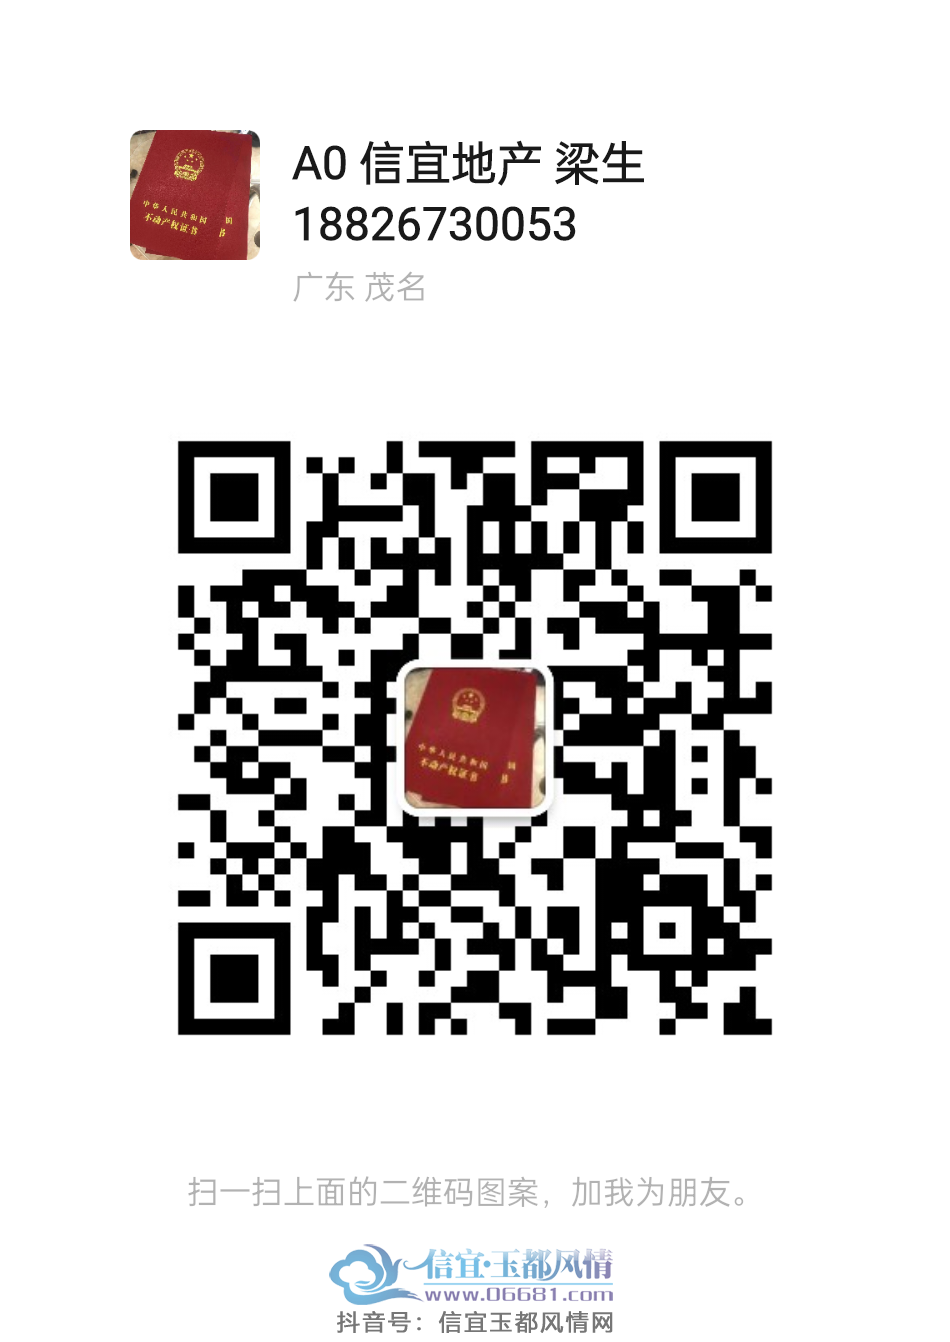 mmqrcode1685949298397.png